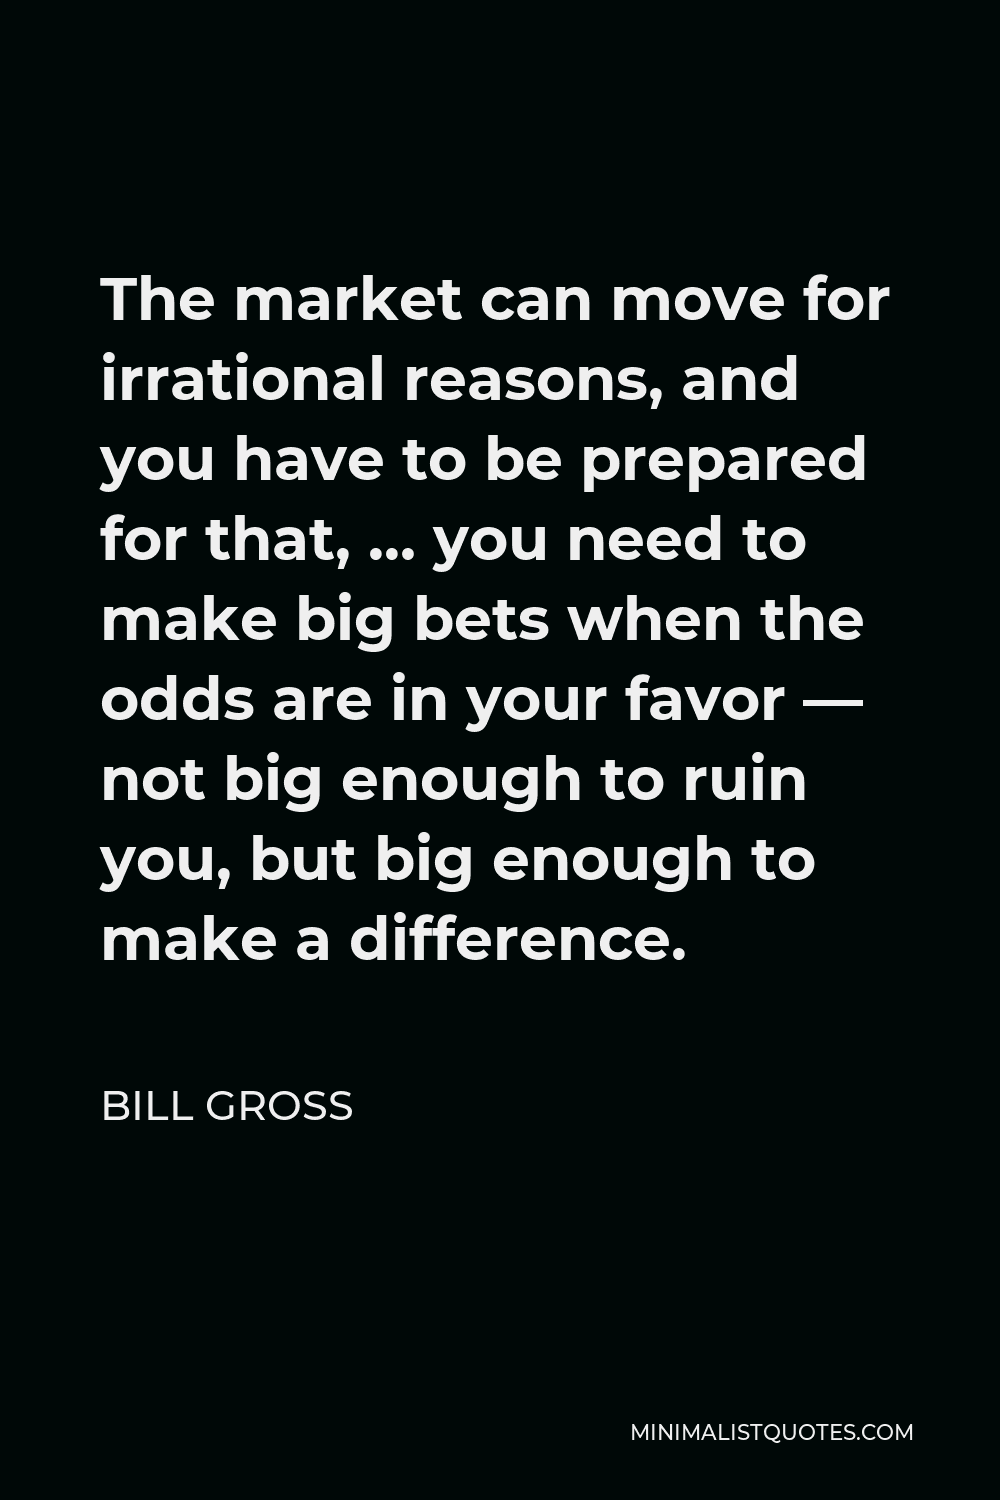 Bill Gross Quote - The market can move for irrational reasons, and you have to be prepared for that, … you need to make big bets when the odds are in your favor — not big enough to ruin you, but big enough to make a difference.